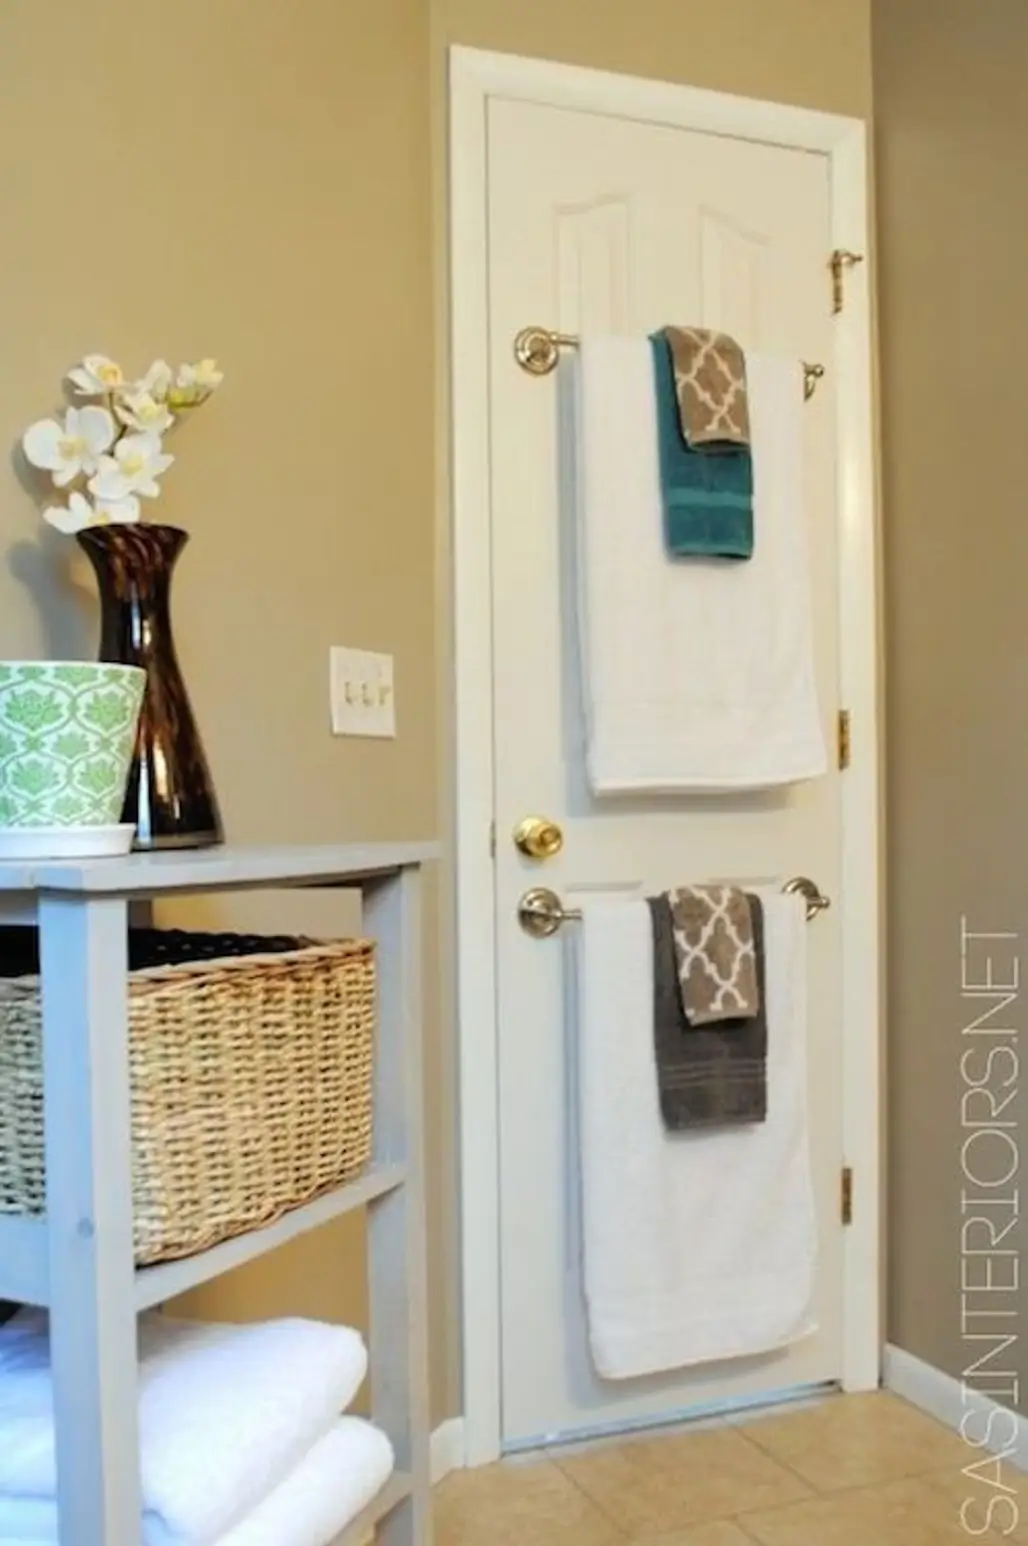 Save Space by Hanging a Towel Rack behind the Door